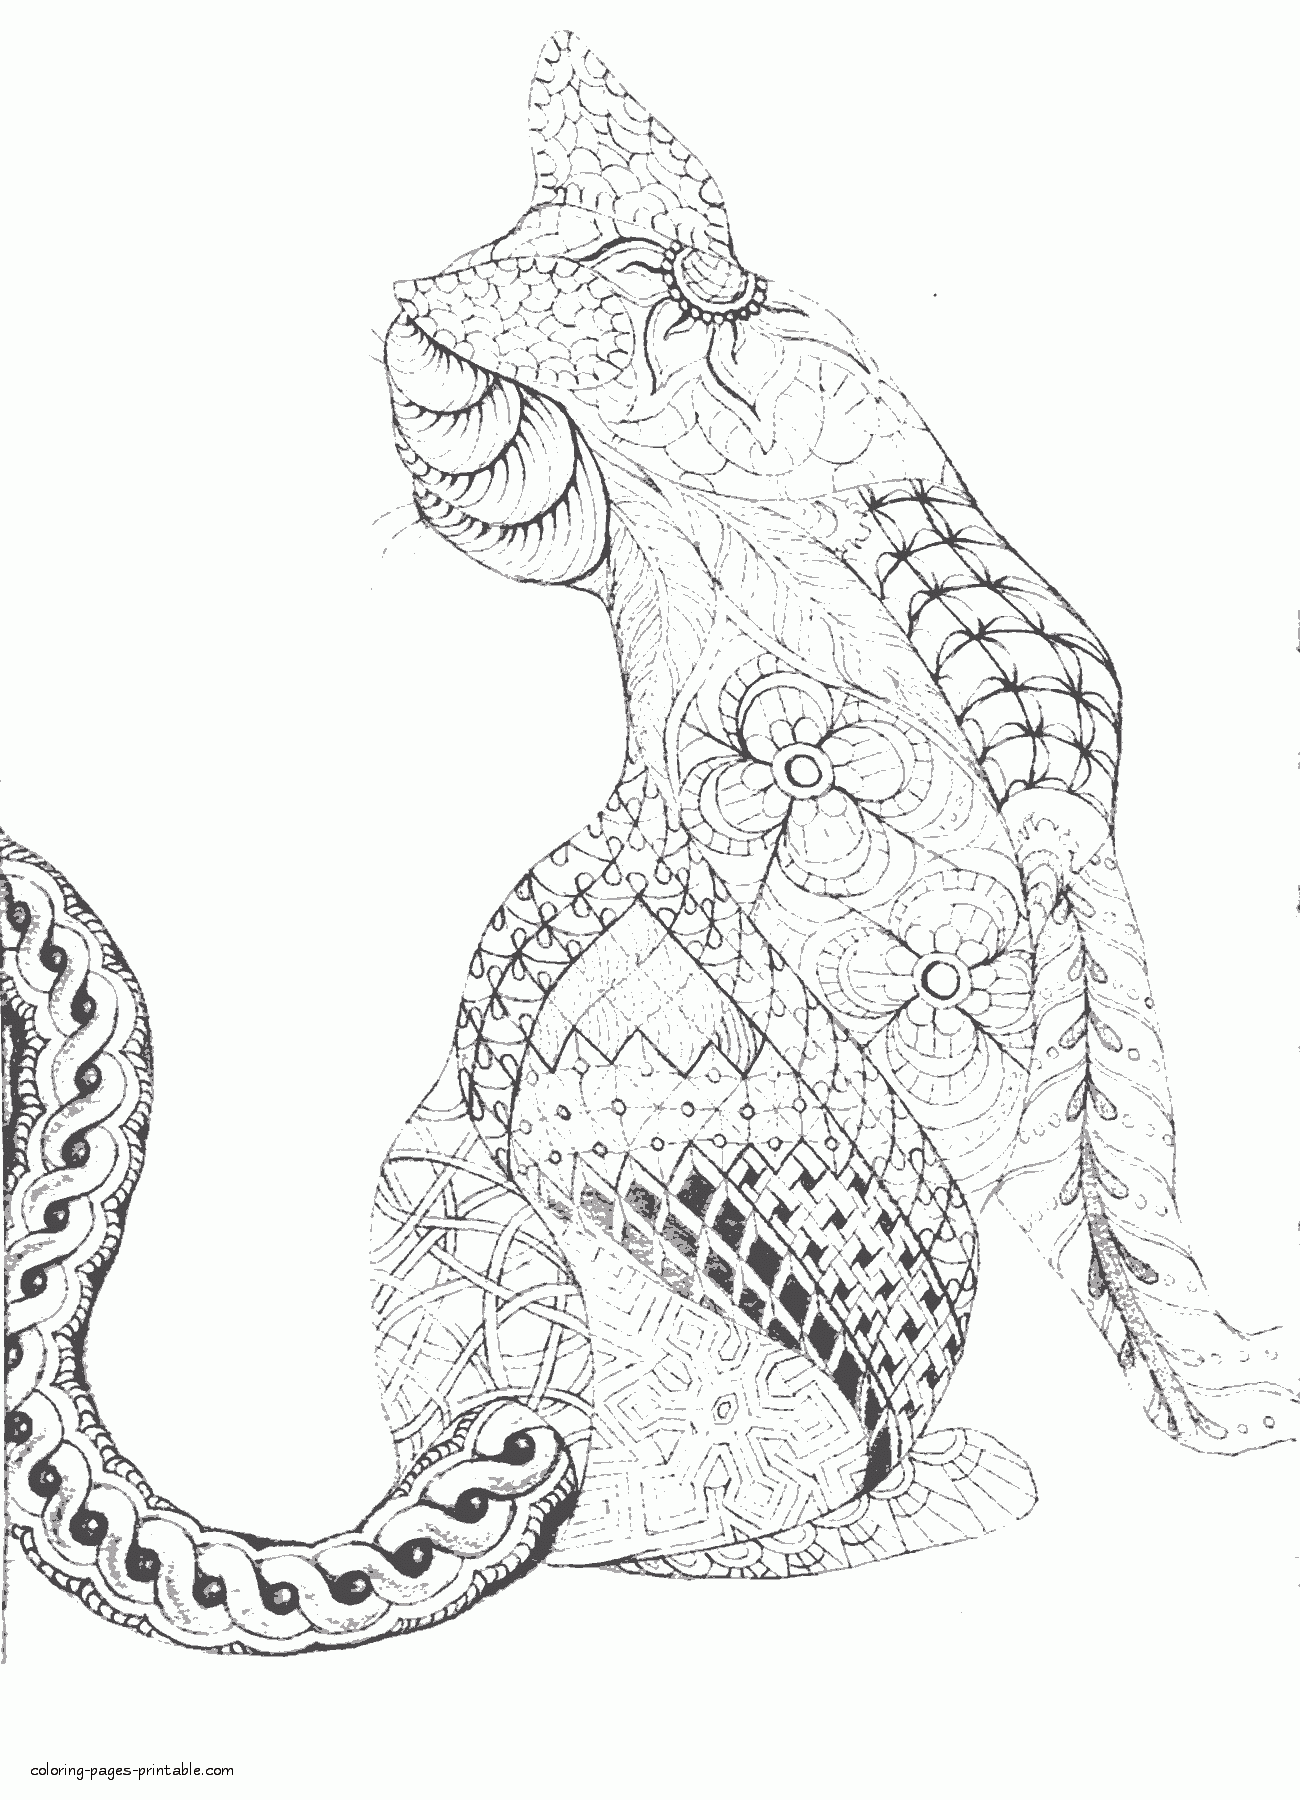 Difficult animal coloring pages coloring